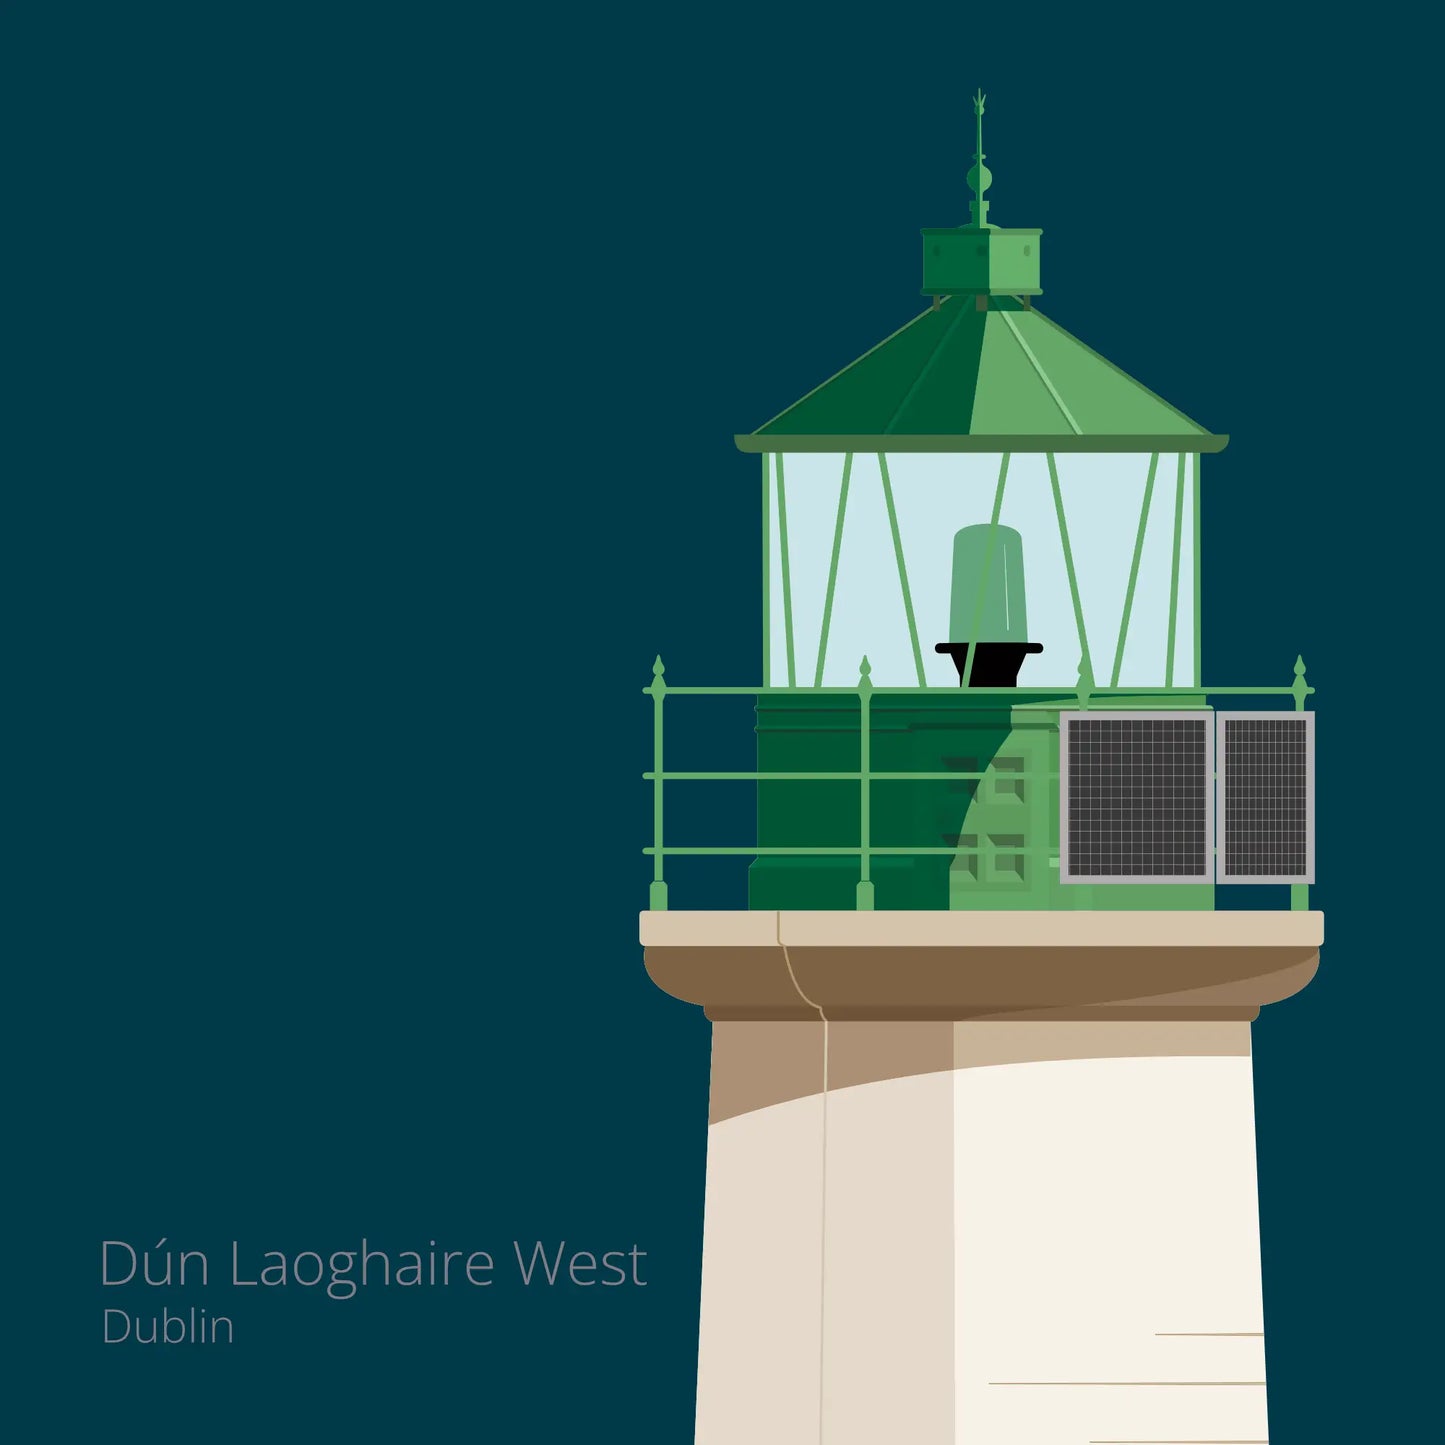 Illustration of Dún Laoghaire West lighthouse on a midnight blue background